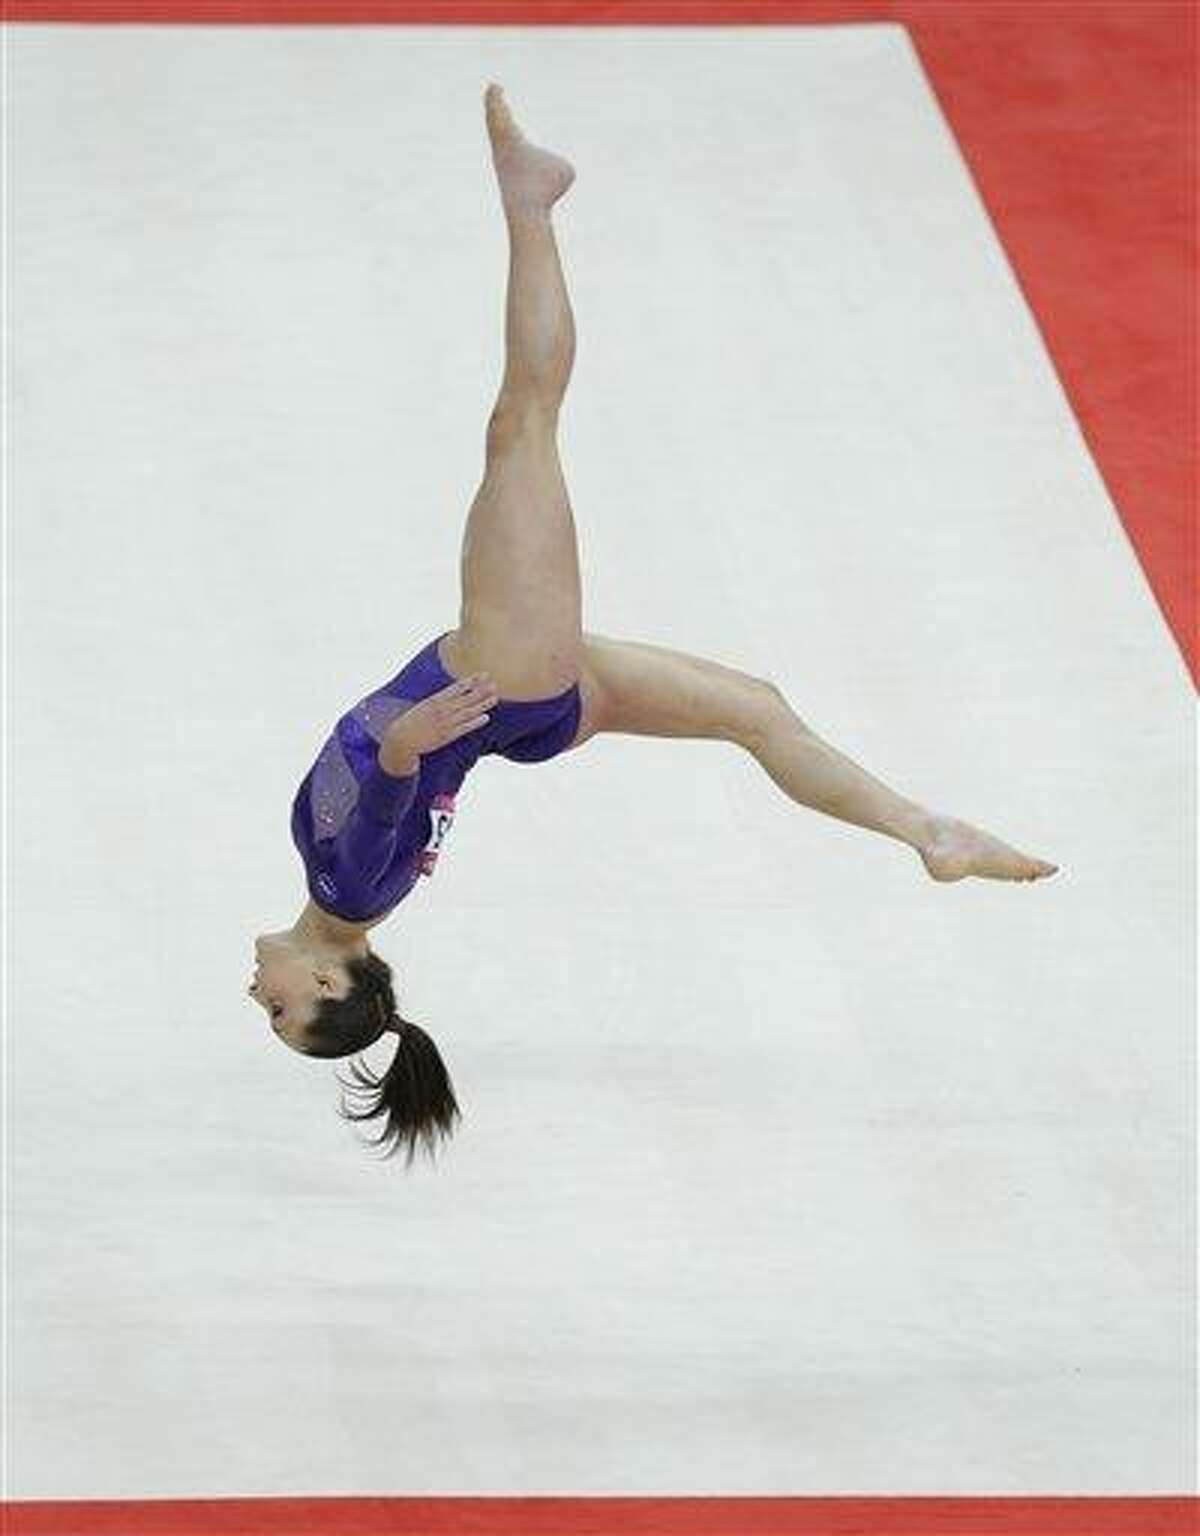 U.S. gymnast Jordyn Wieber performs on the floor during the Artistic Gymnastic women's qualifications at the 2012 Summer Olympics Sunday in London. Associated Press